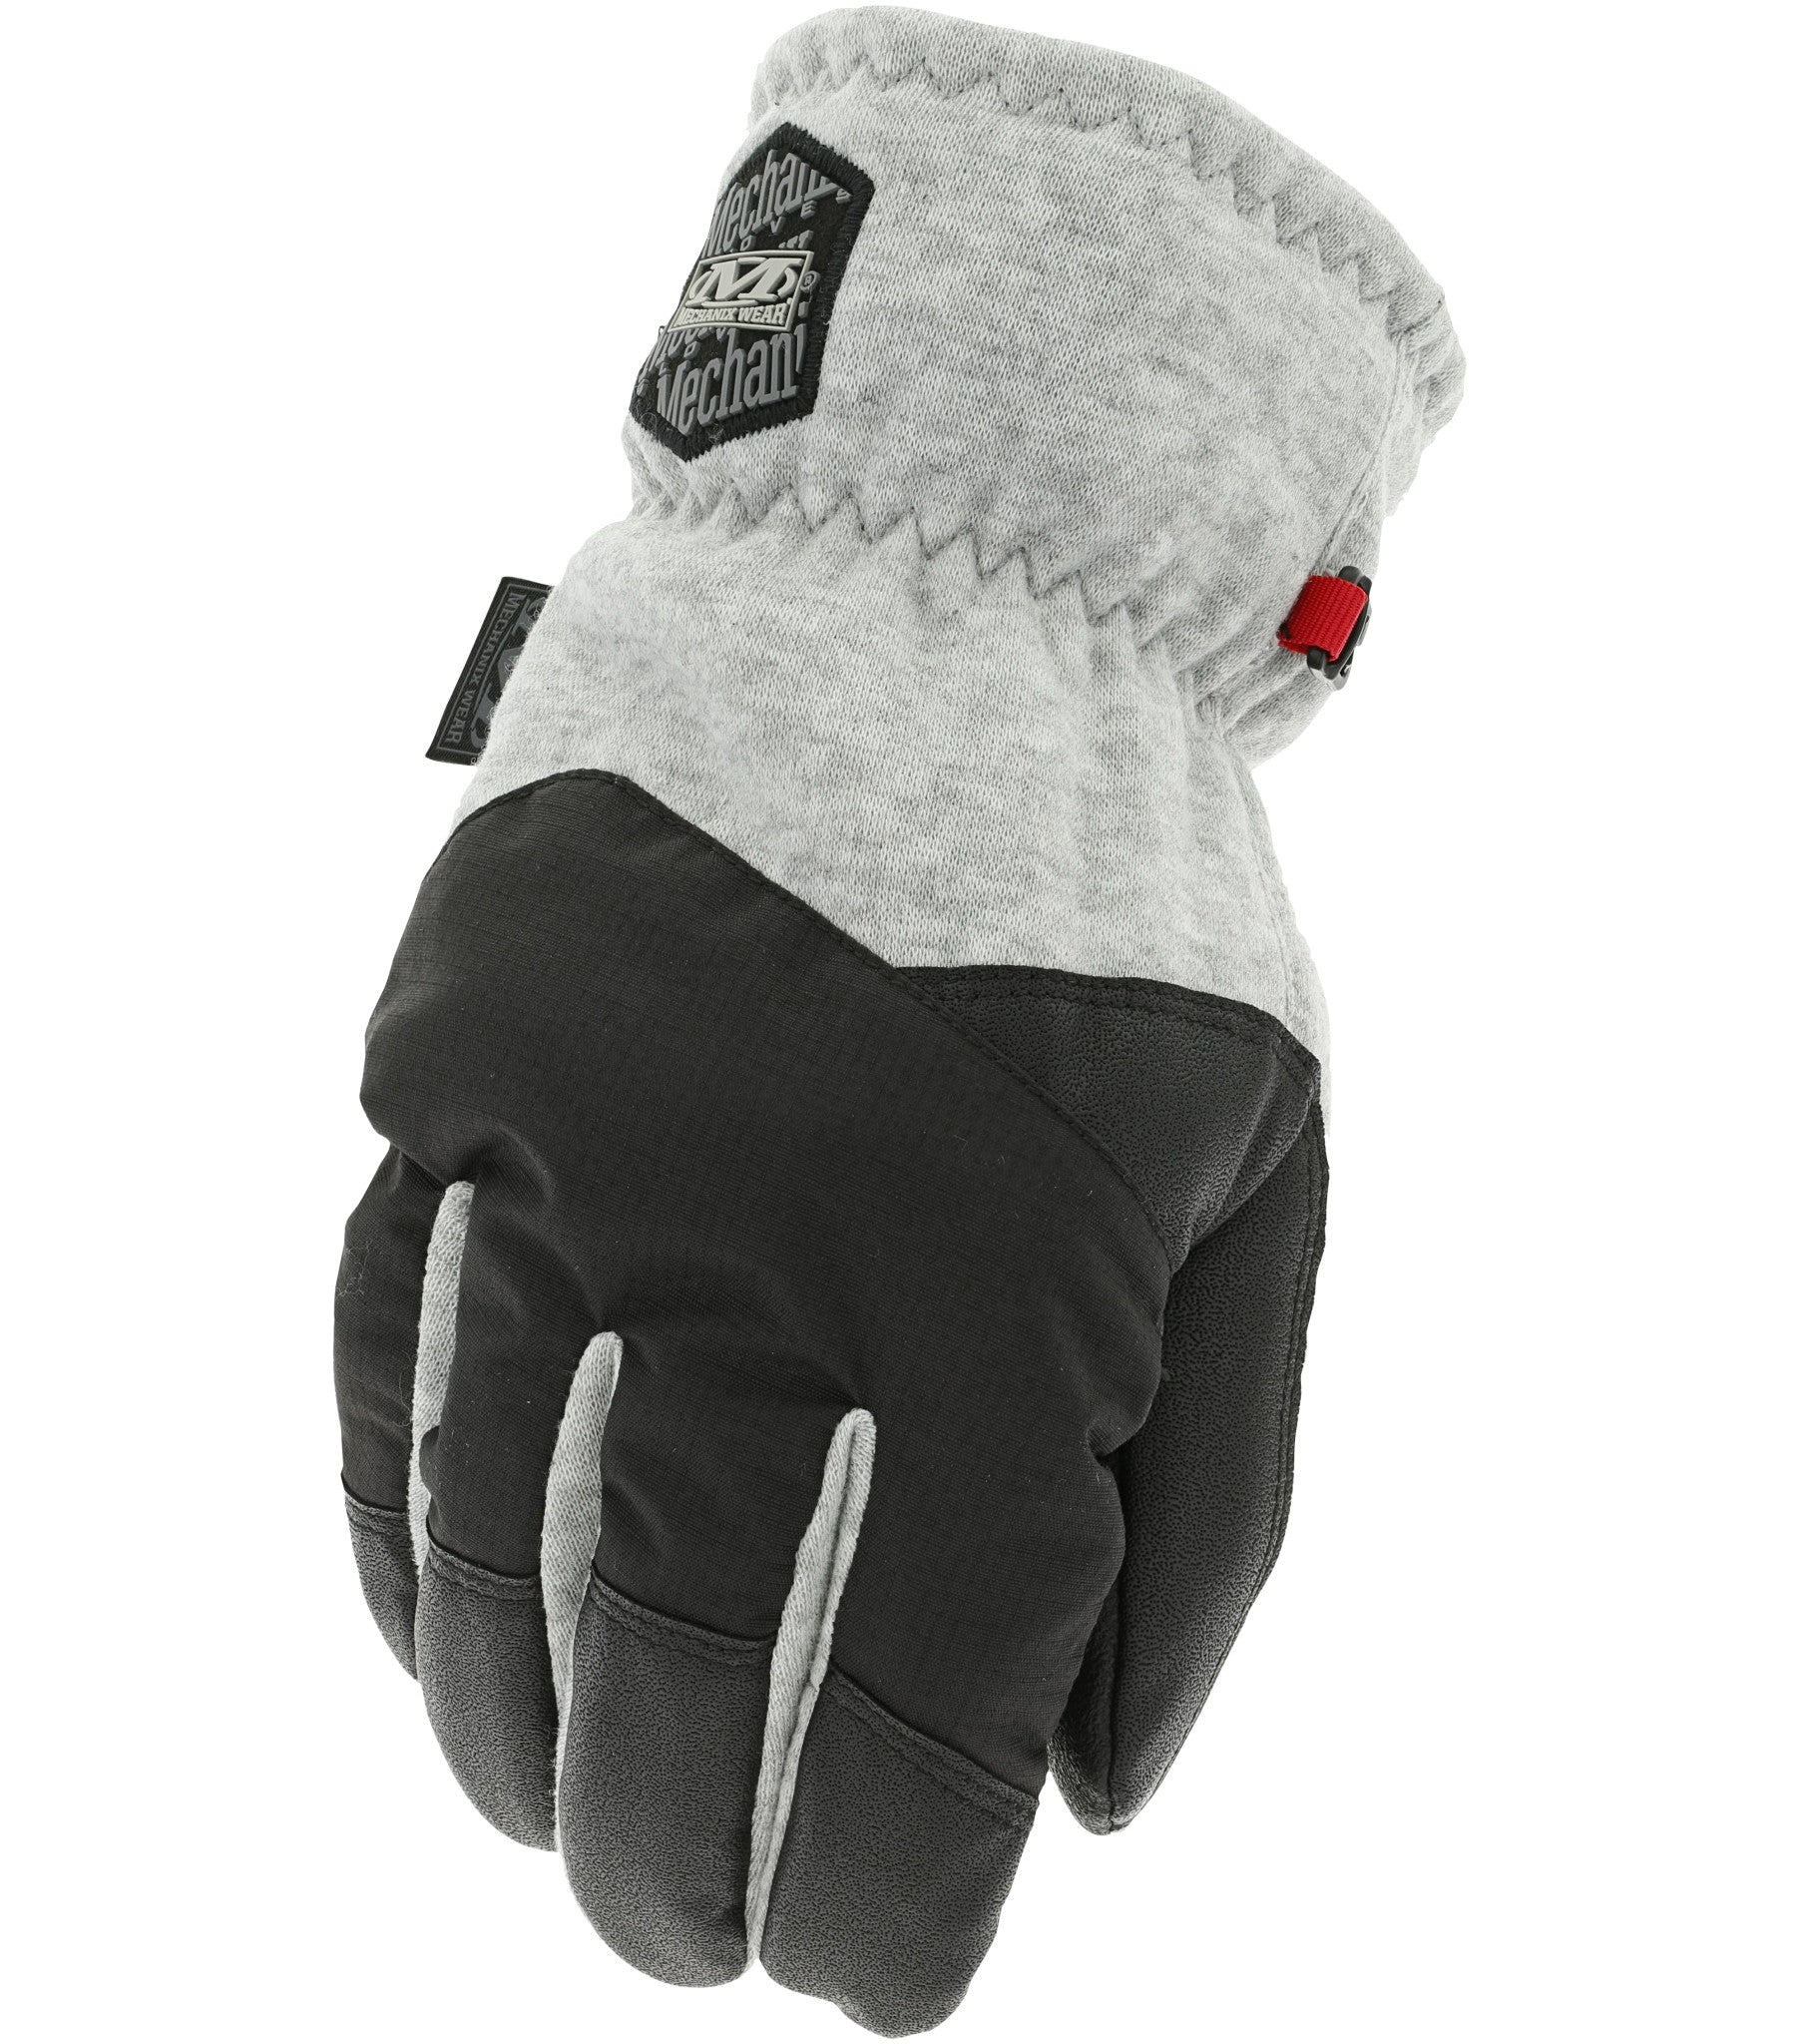 Mechanix Wear Women's Coldwork Guide-Winter Work Gloves, Black/Grey, 1 Pair with Hang Tag (Size SM)